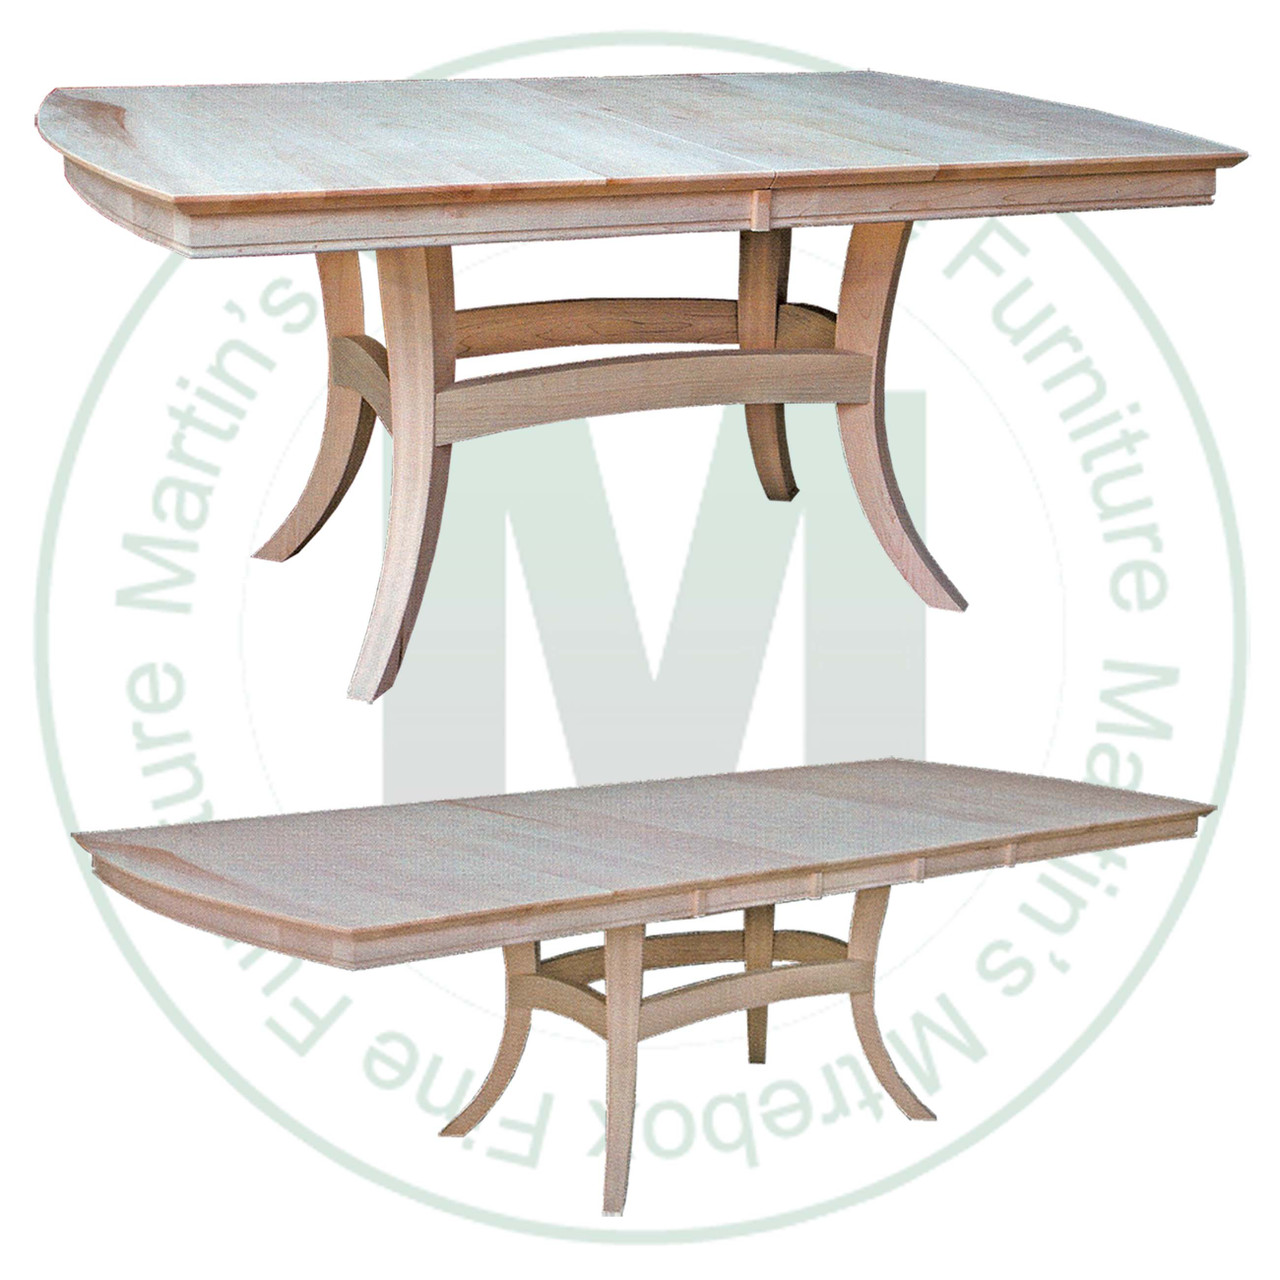 Maple Tokyo Double Pedestal Table 42''D x 72''W x 30''H With 3 - 12'' Leaves